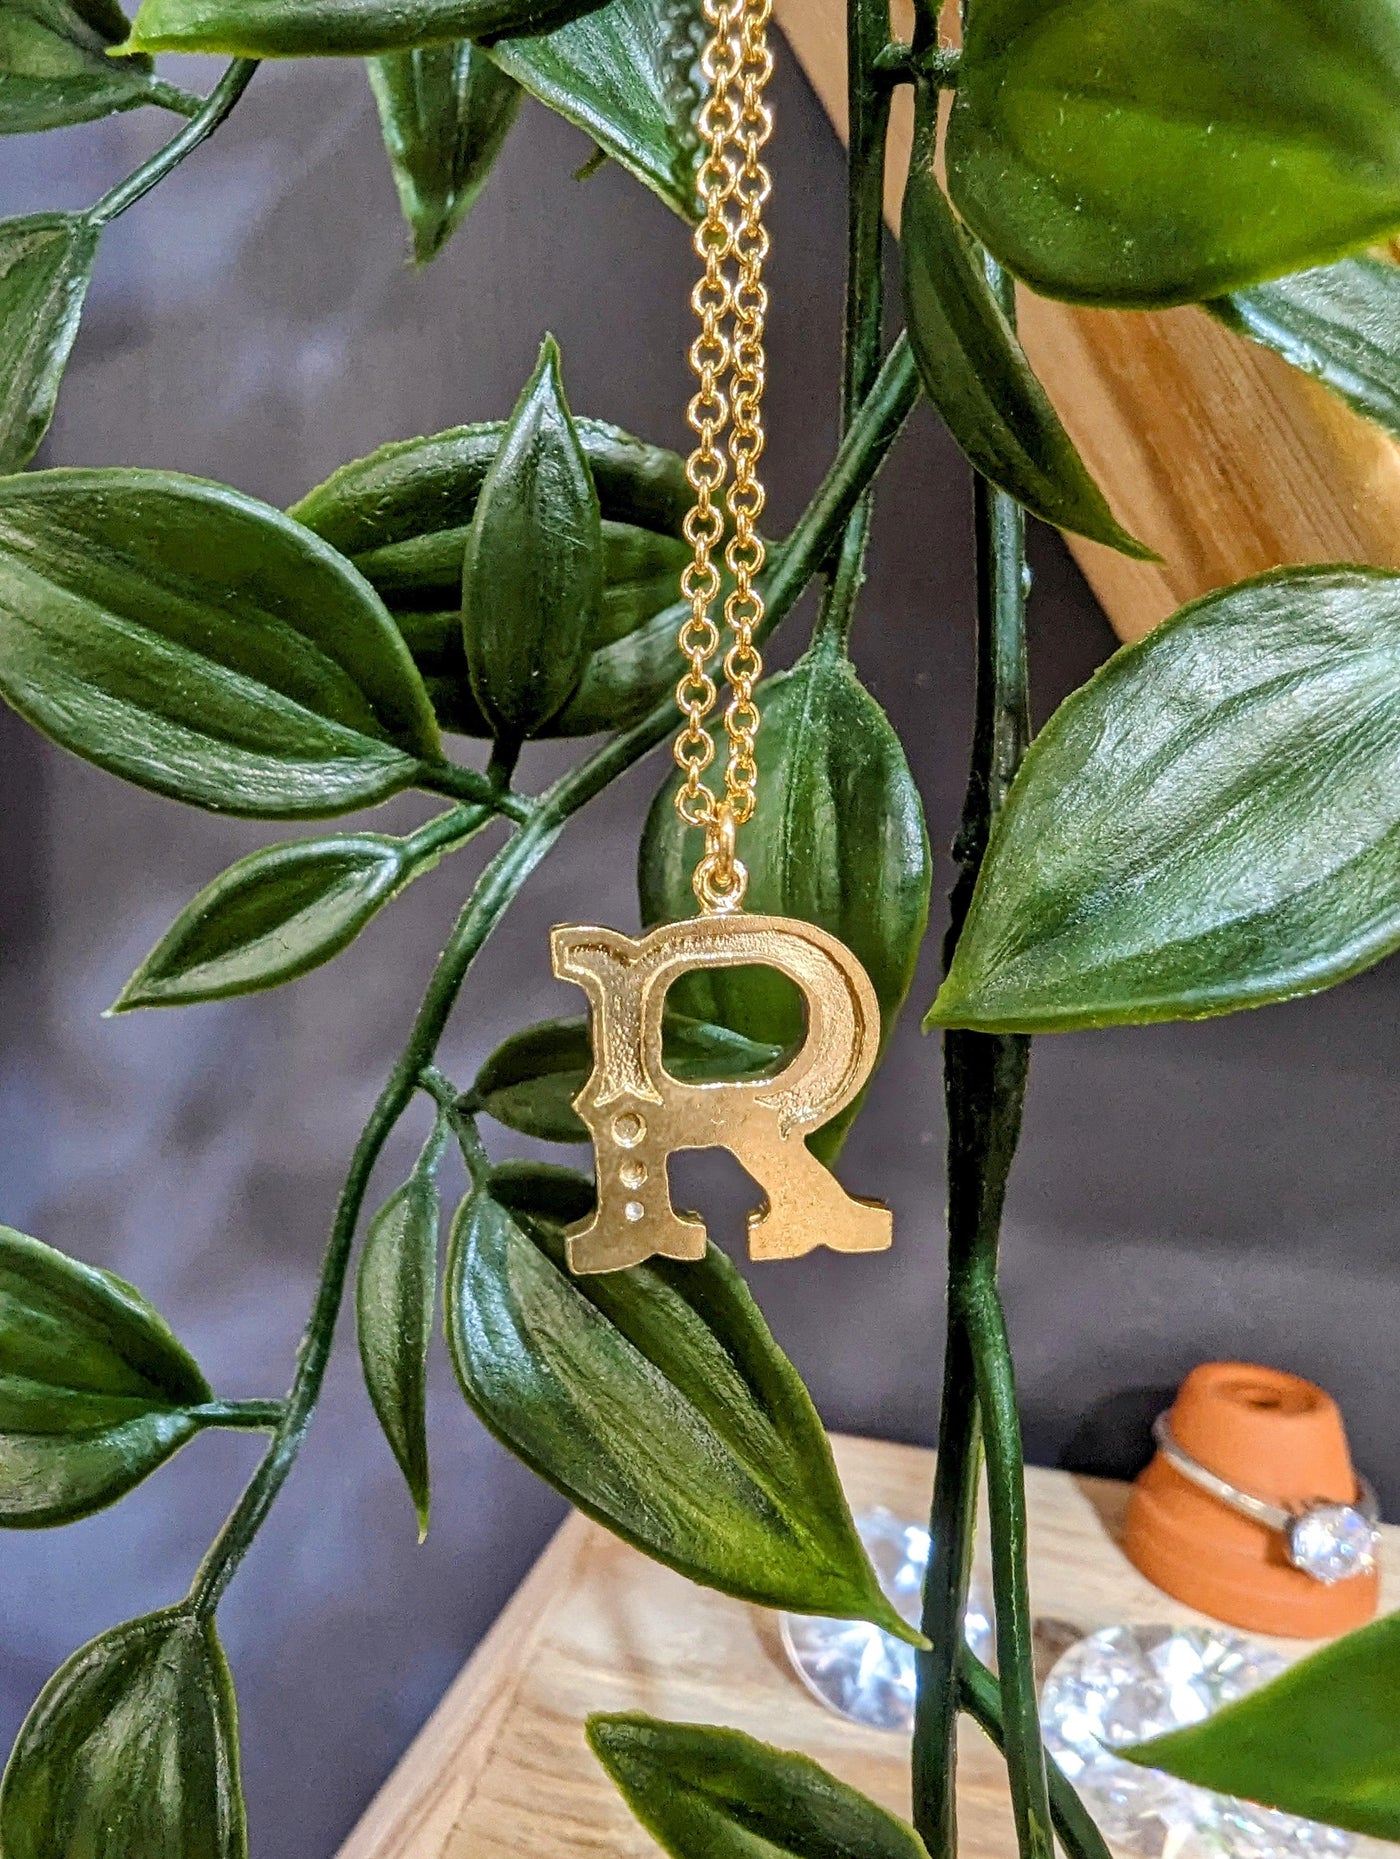 Alex Monroe 22ct Gold Vermeil Just My Type Letter R Necklace - Rococo Jewellery